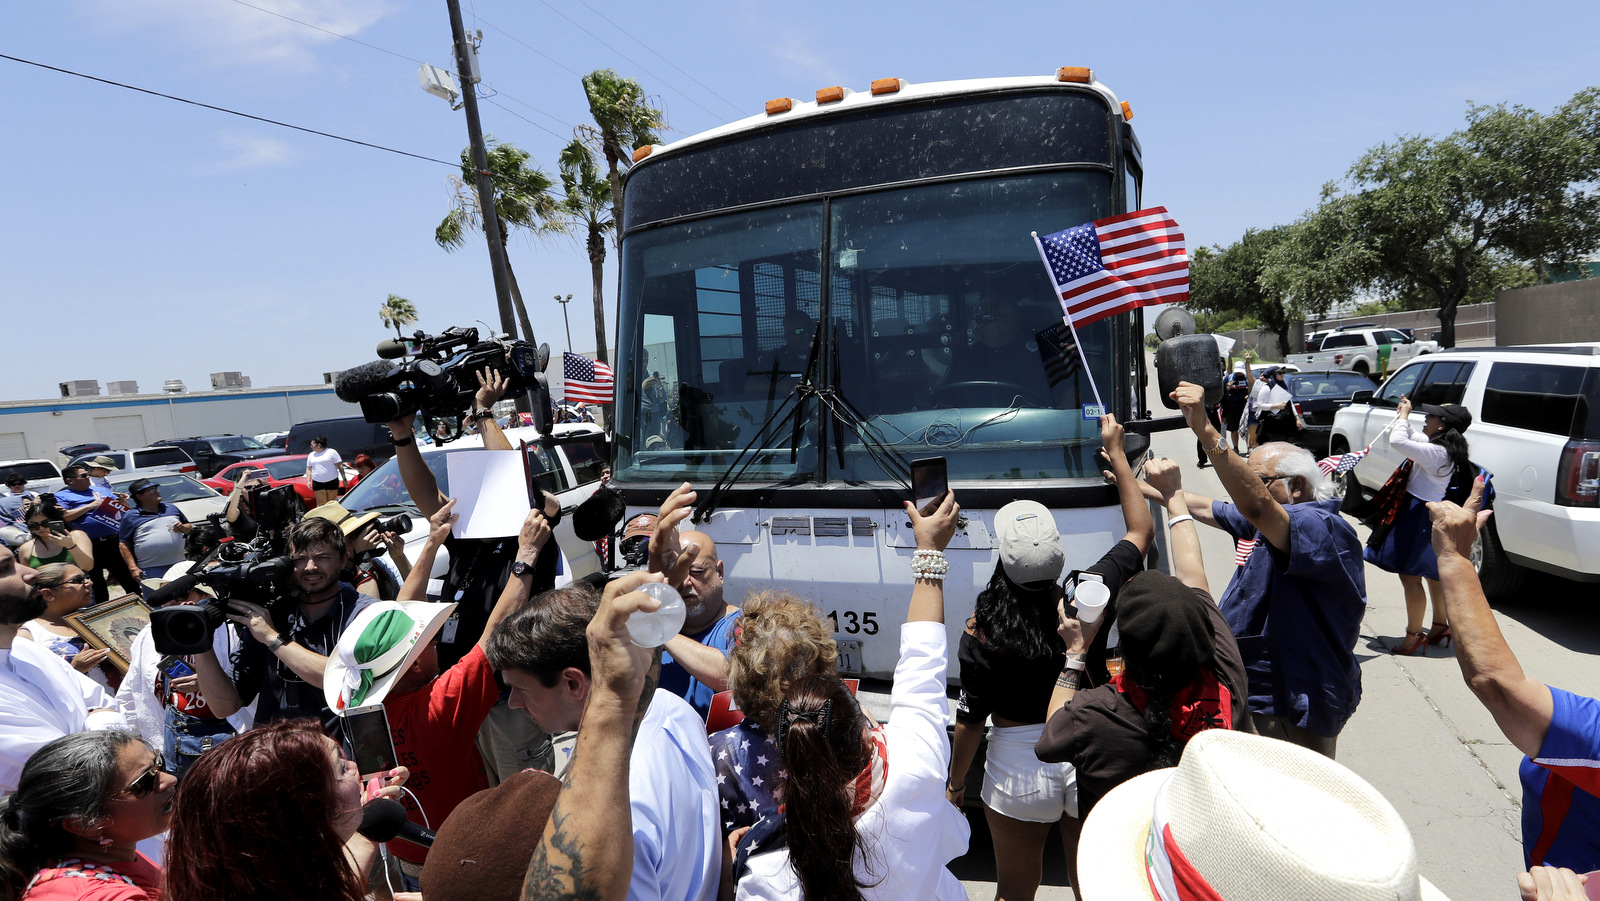 Protesters block a bus with immigrant children onboard during a protest outside the U.S. Border Patrol Central Processing Center, June 23, 2018, in McAllen, Texas. David J. Phillip | AP